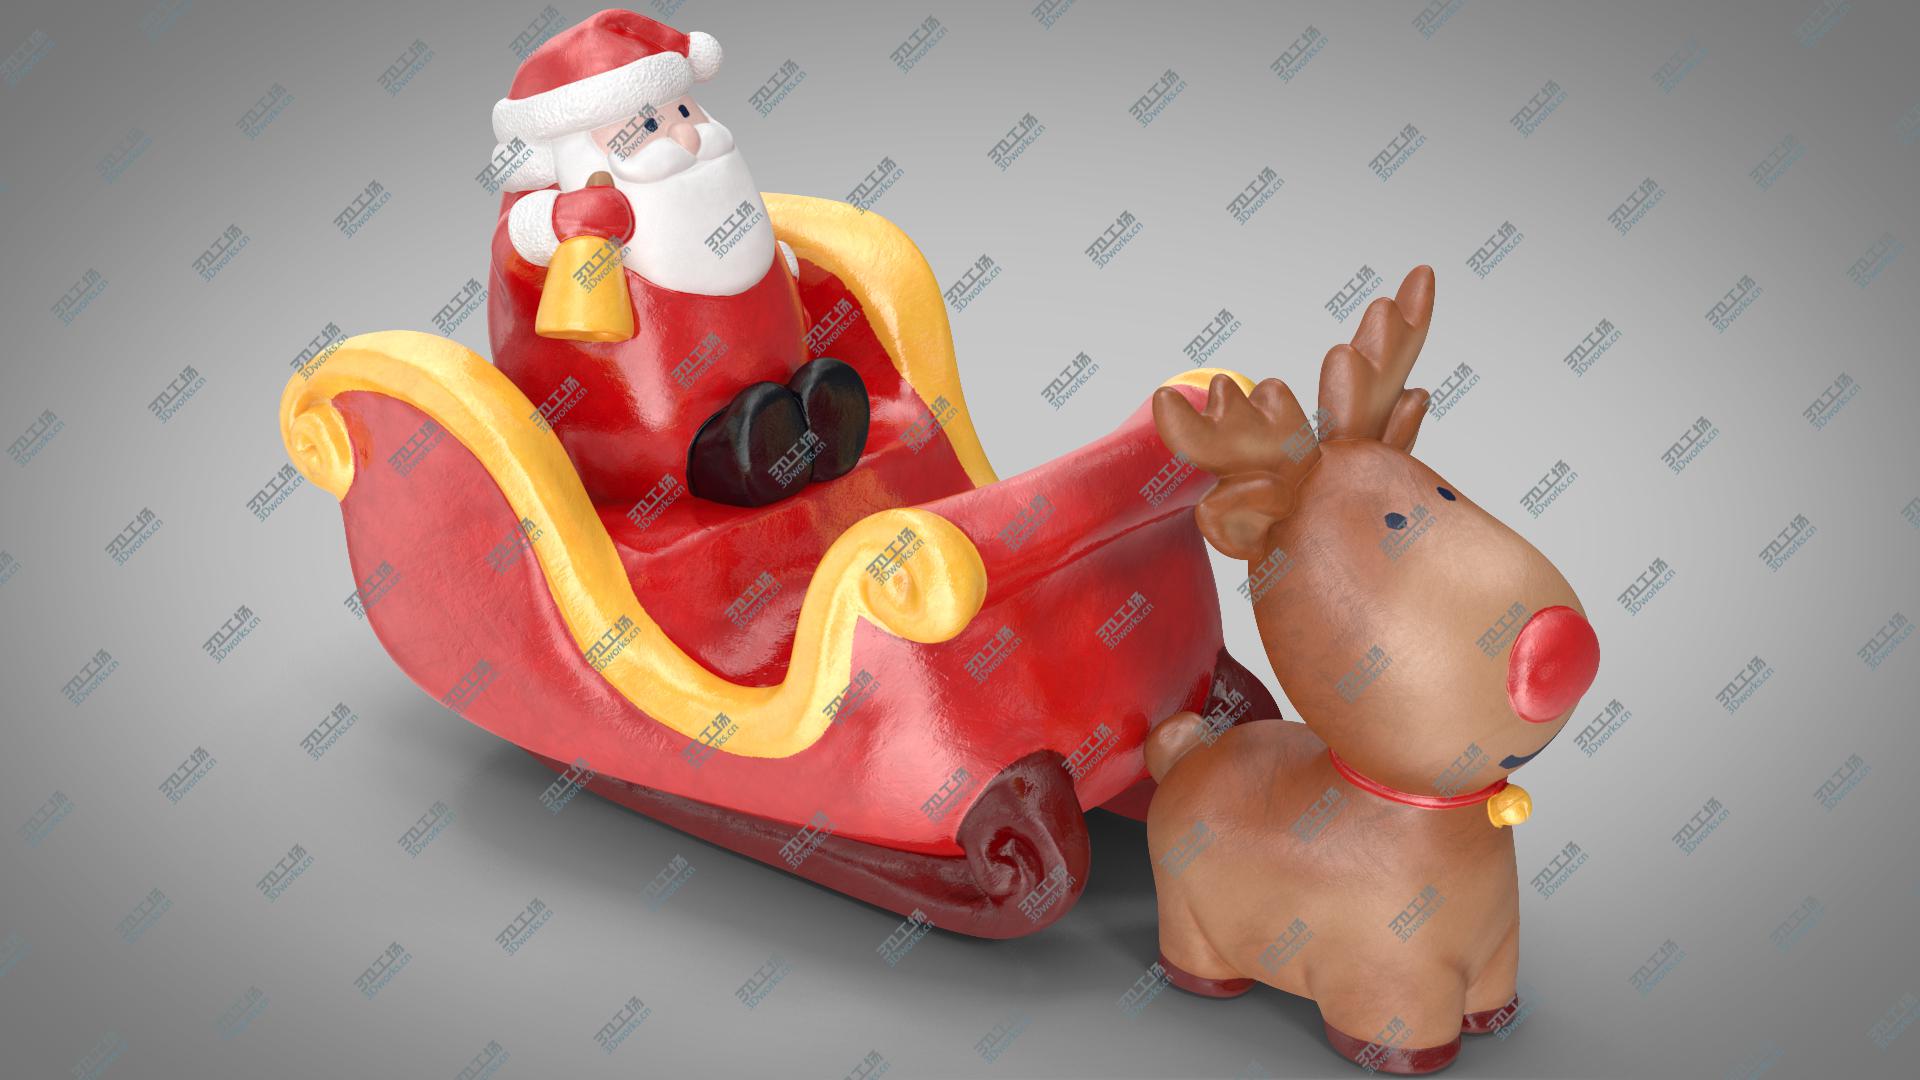 images/goods_img/202105071/3D Santa Claus with Sleigh Decorative Figurine model/1.jpg